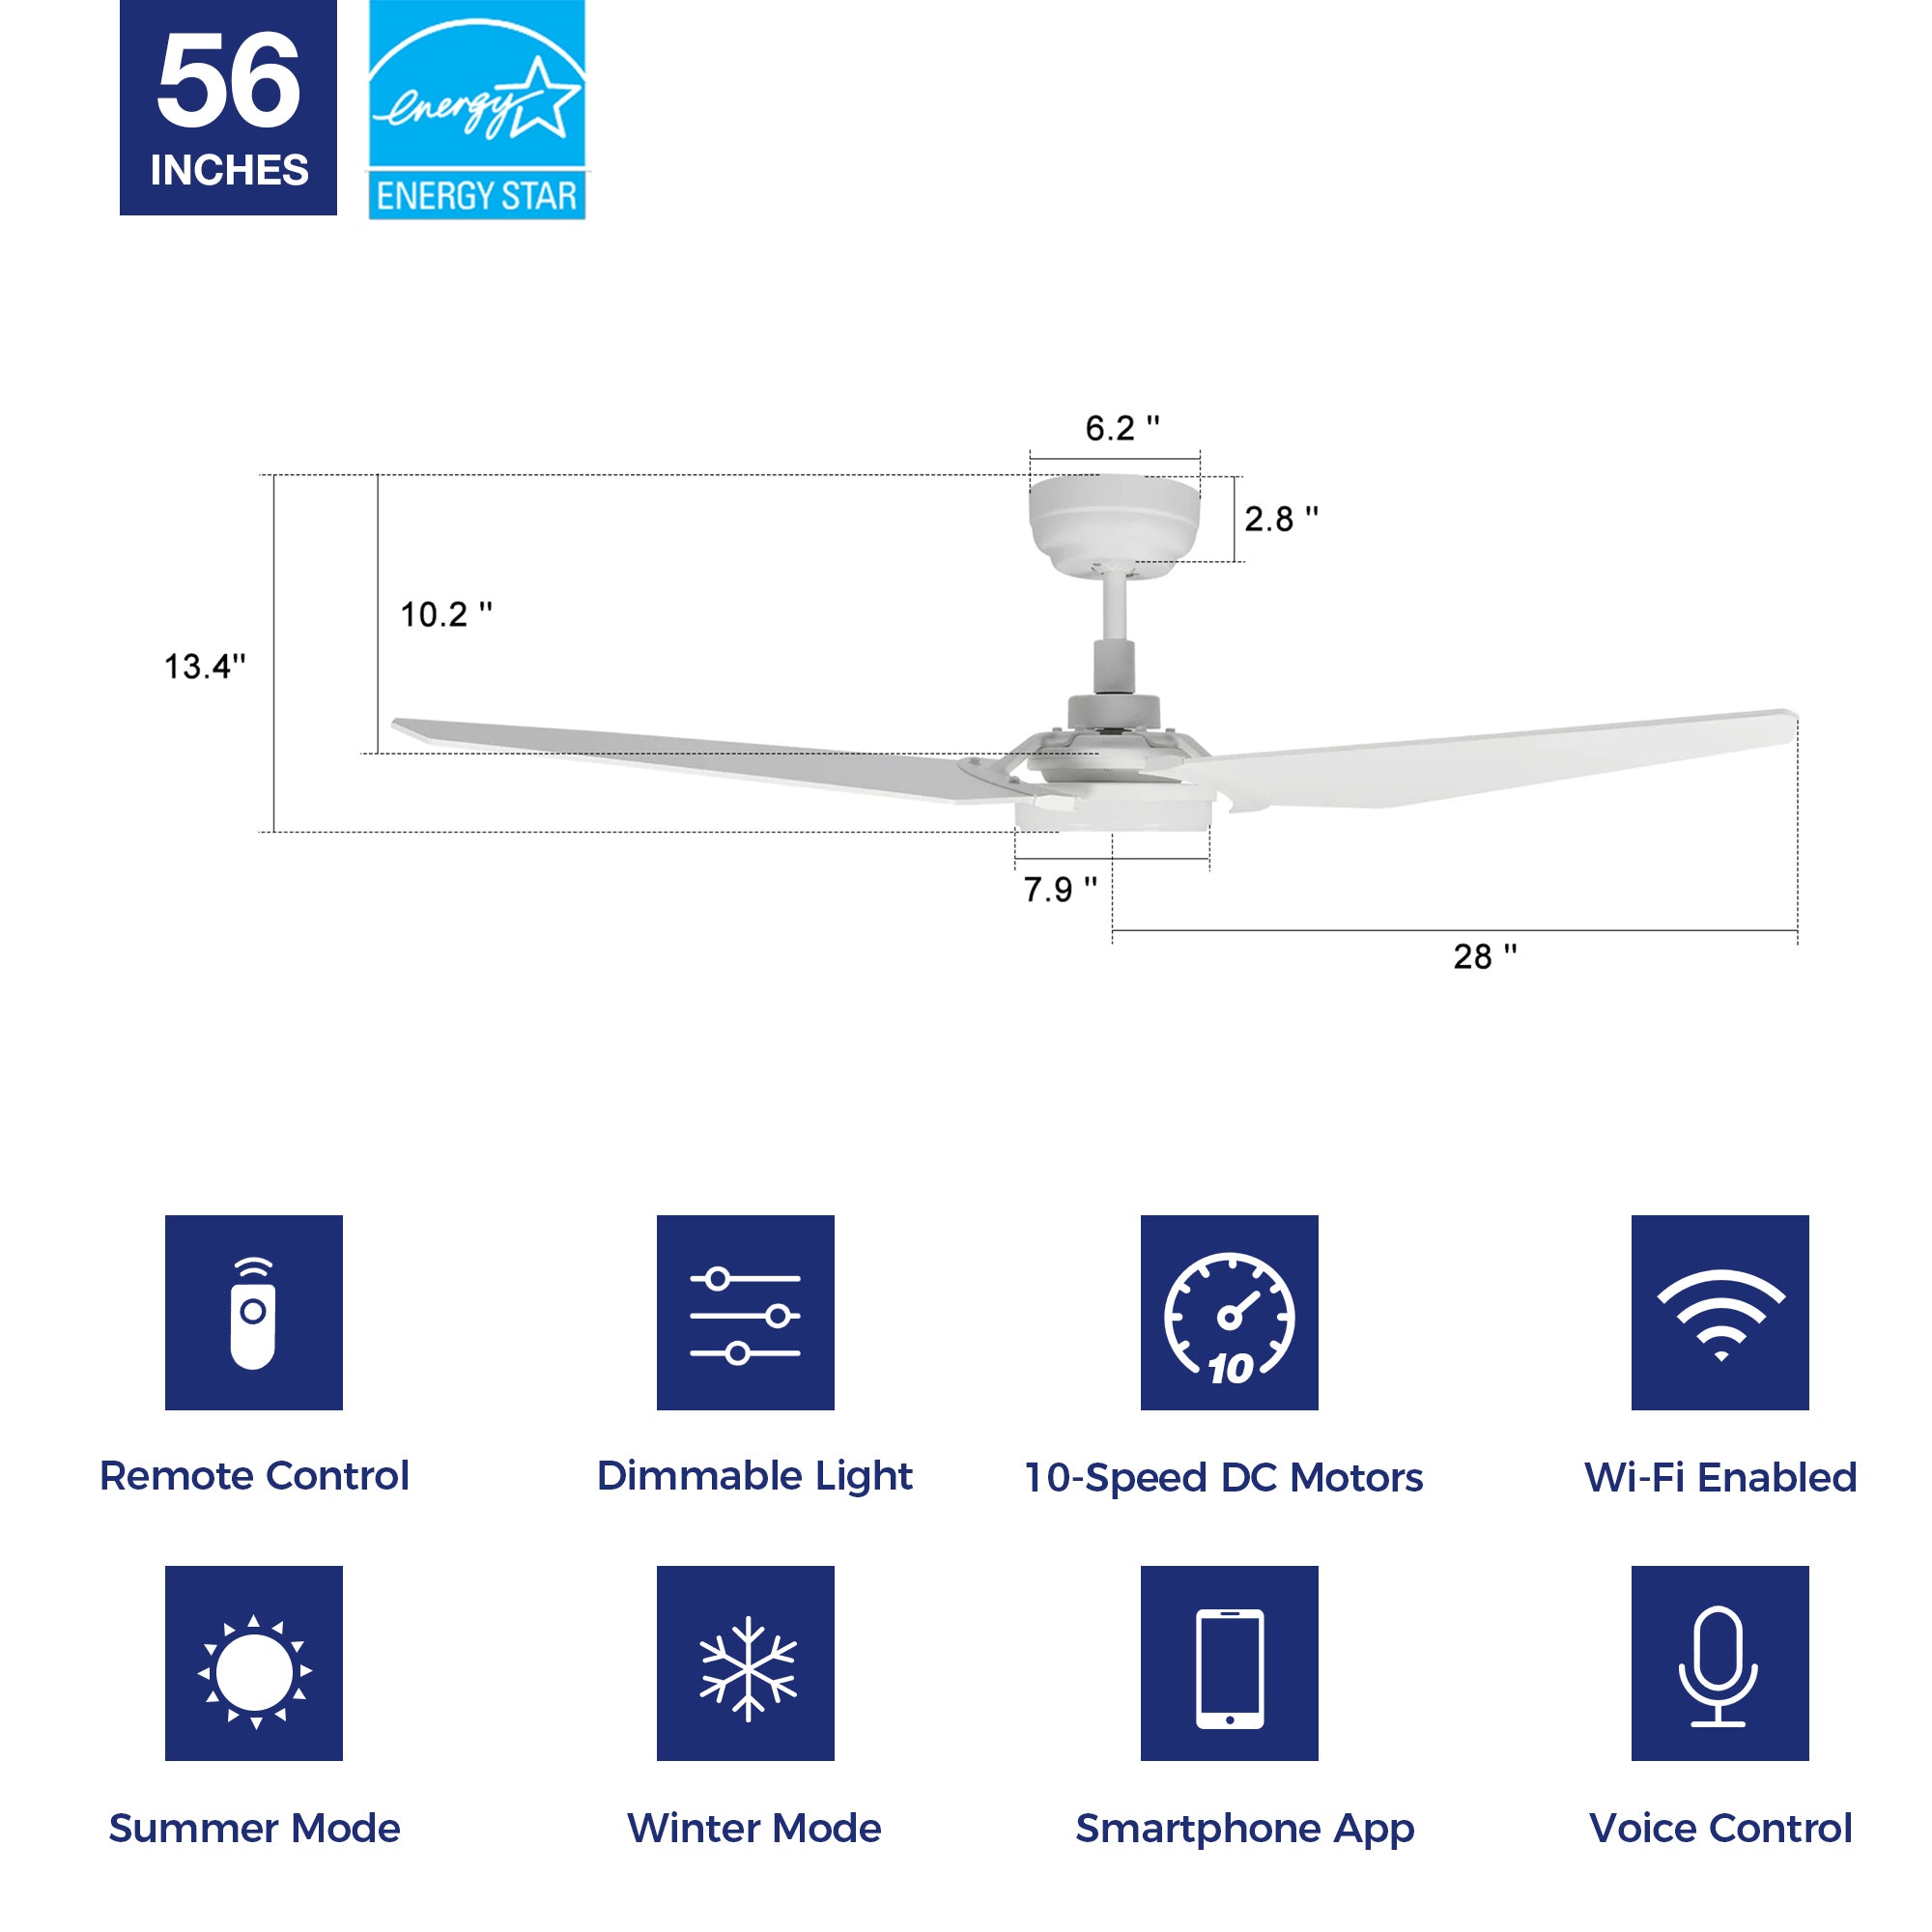 Trailblazer Outdoor 56&quot; Smart Ceiling Fan with LED Light Kit-White Base and White Pattern Fan Blades. The fan features Remote control, Wi-Fi apps and Voice control technology (compatible with Amazon Alexa and Google Home Assistant ) to set fan preferences. Equipping with 2150-lumens LED lights and 10-speed DC Motor (4400CFM airflow output), bring you cool and bright. 